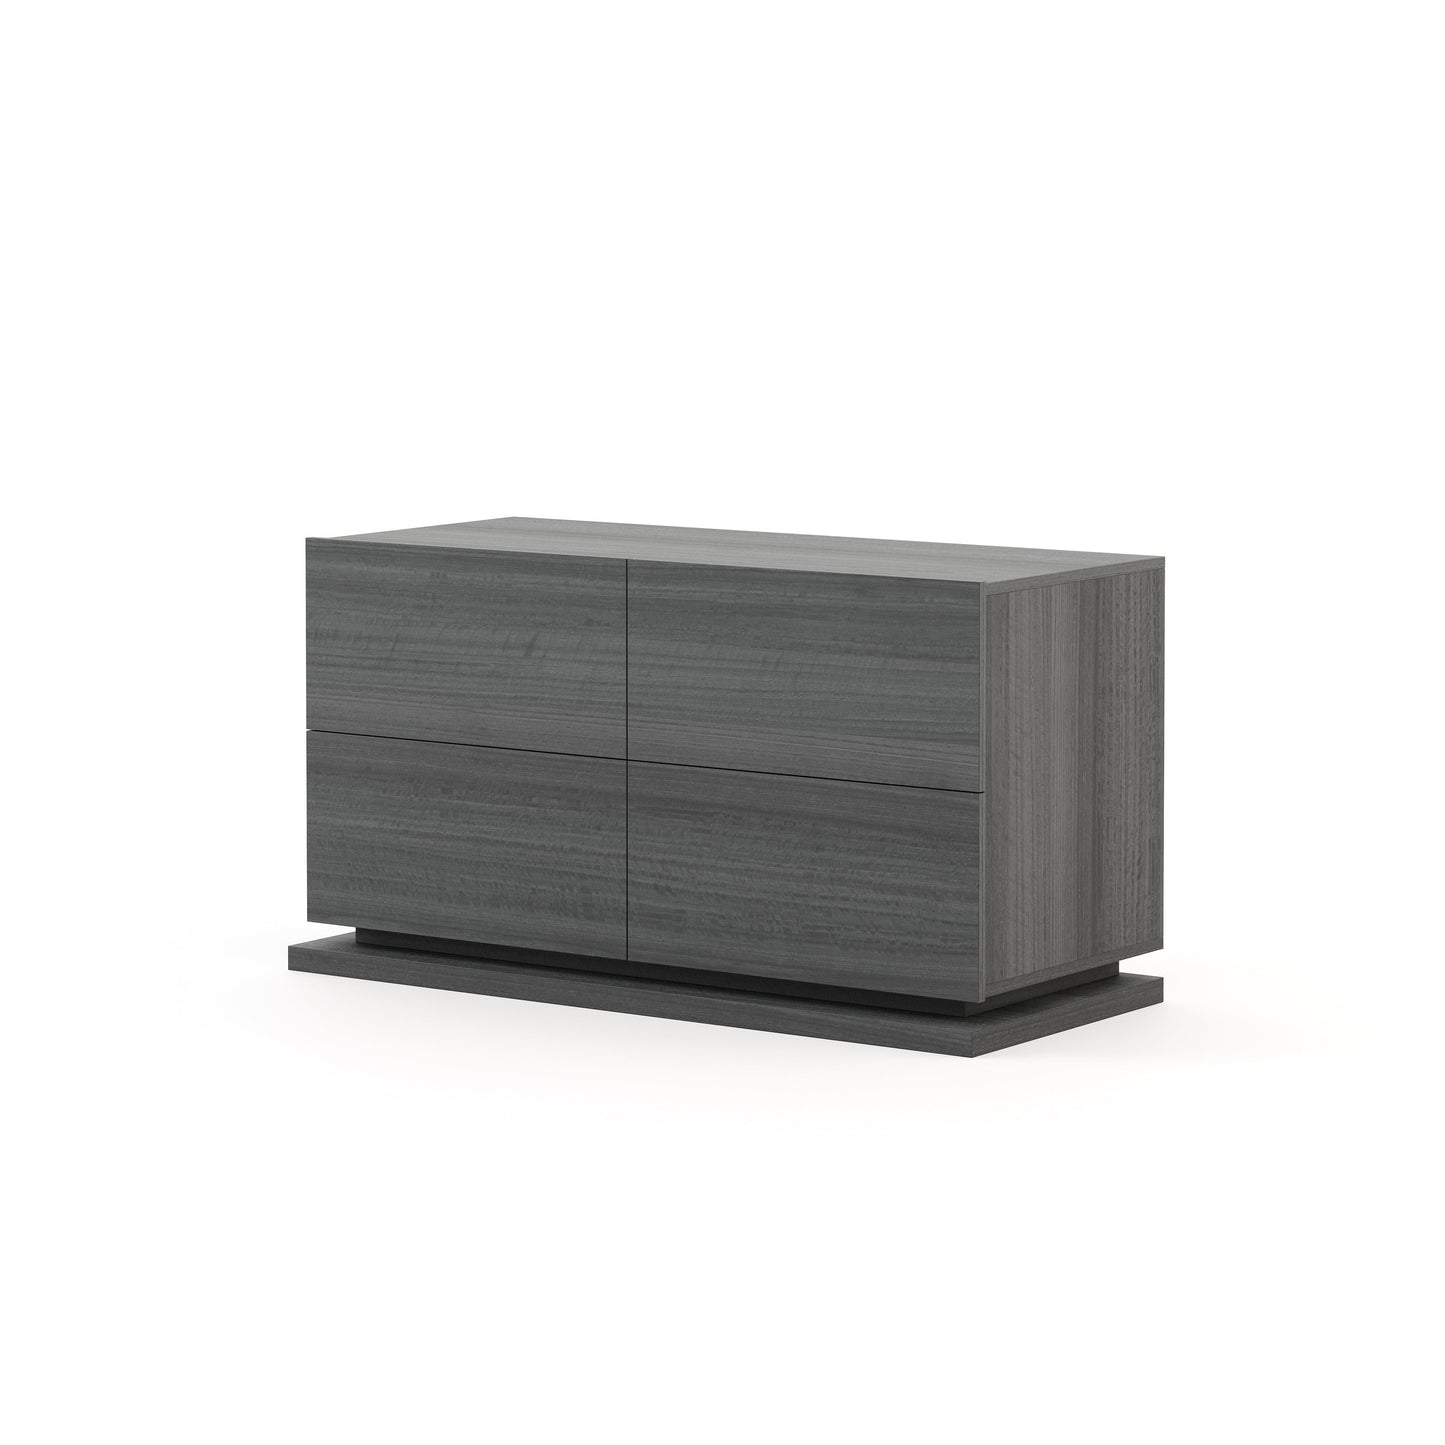 Uso Chest of Drawers | Laskasas | Dressers and chests | uso-chest-of-drawers